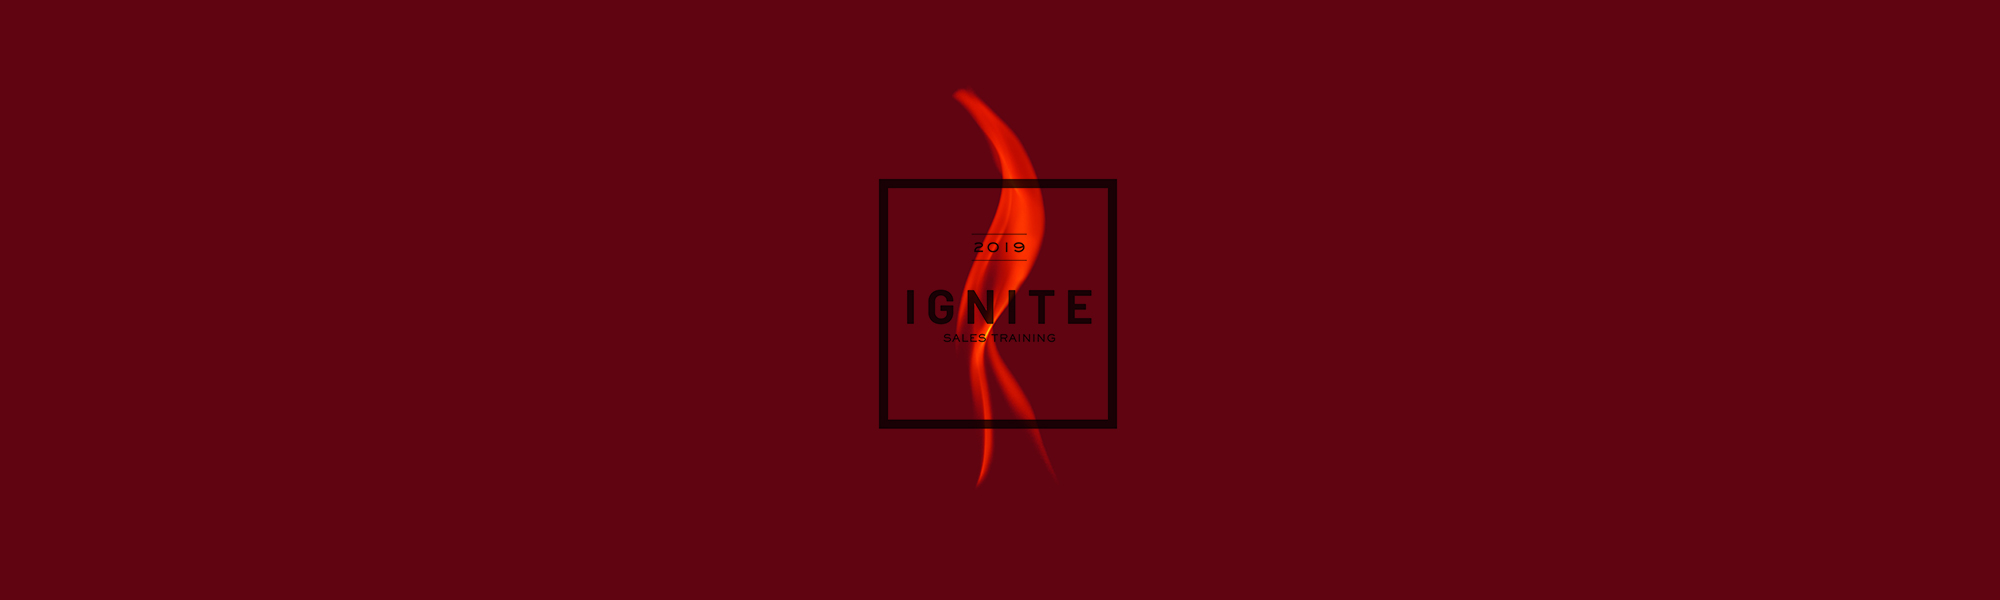 Ignite_footer2